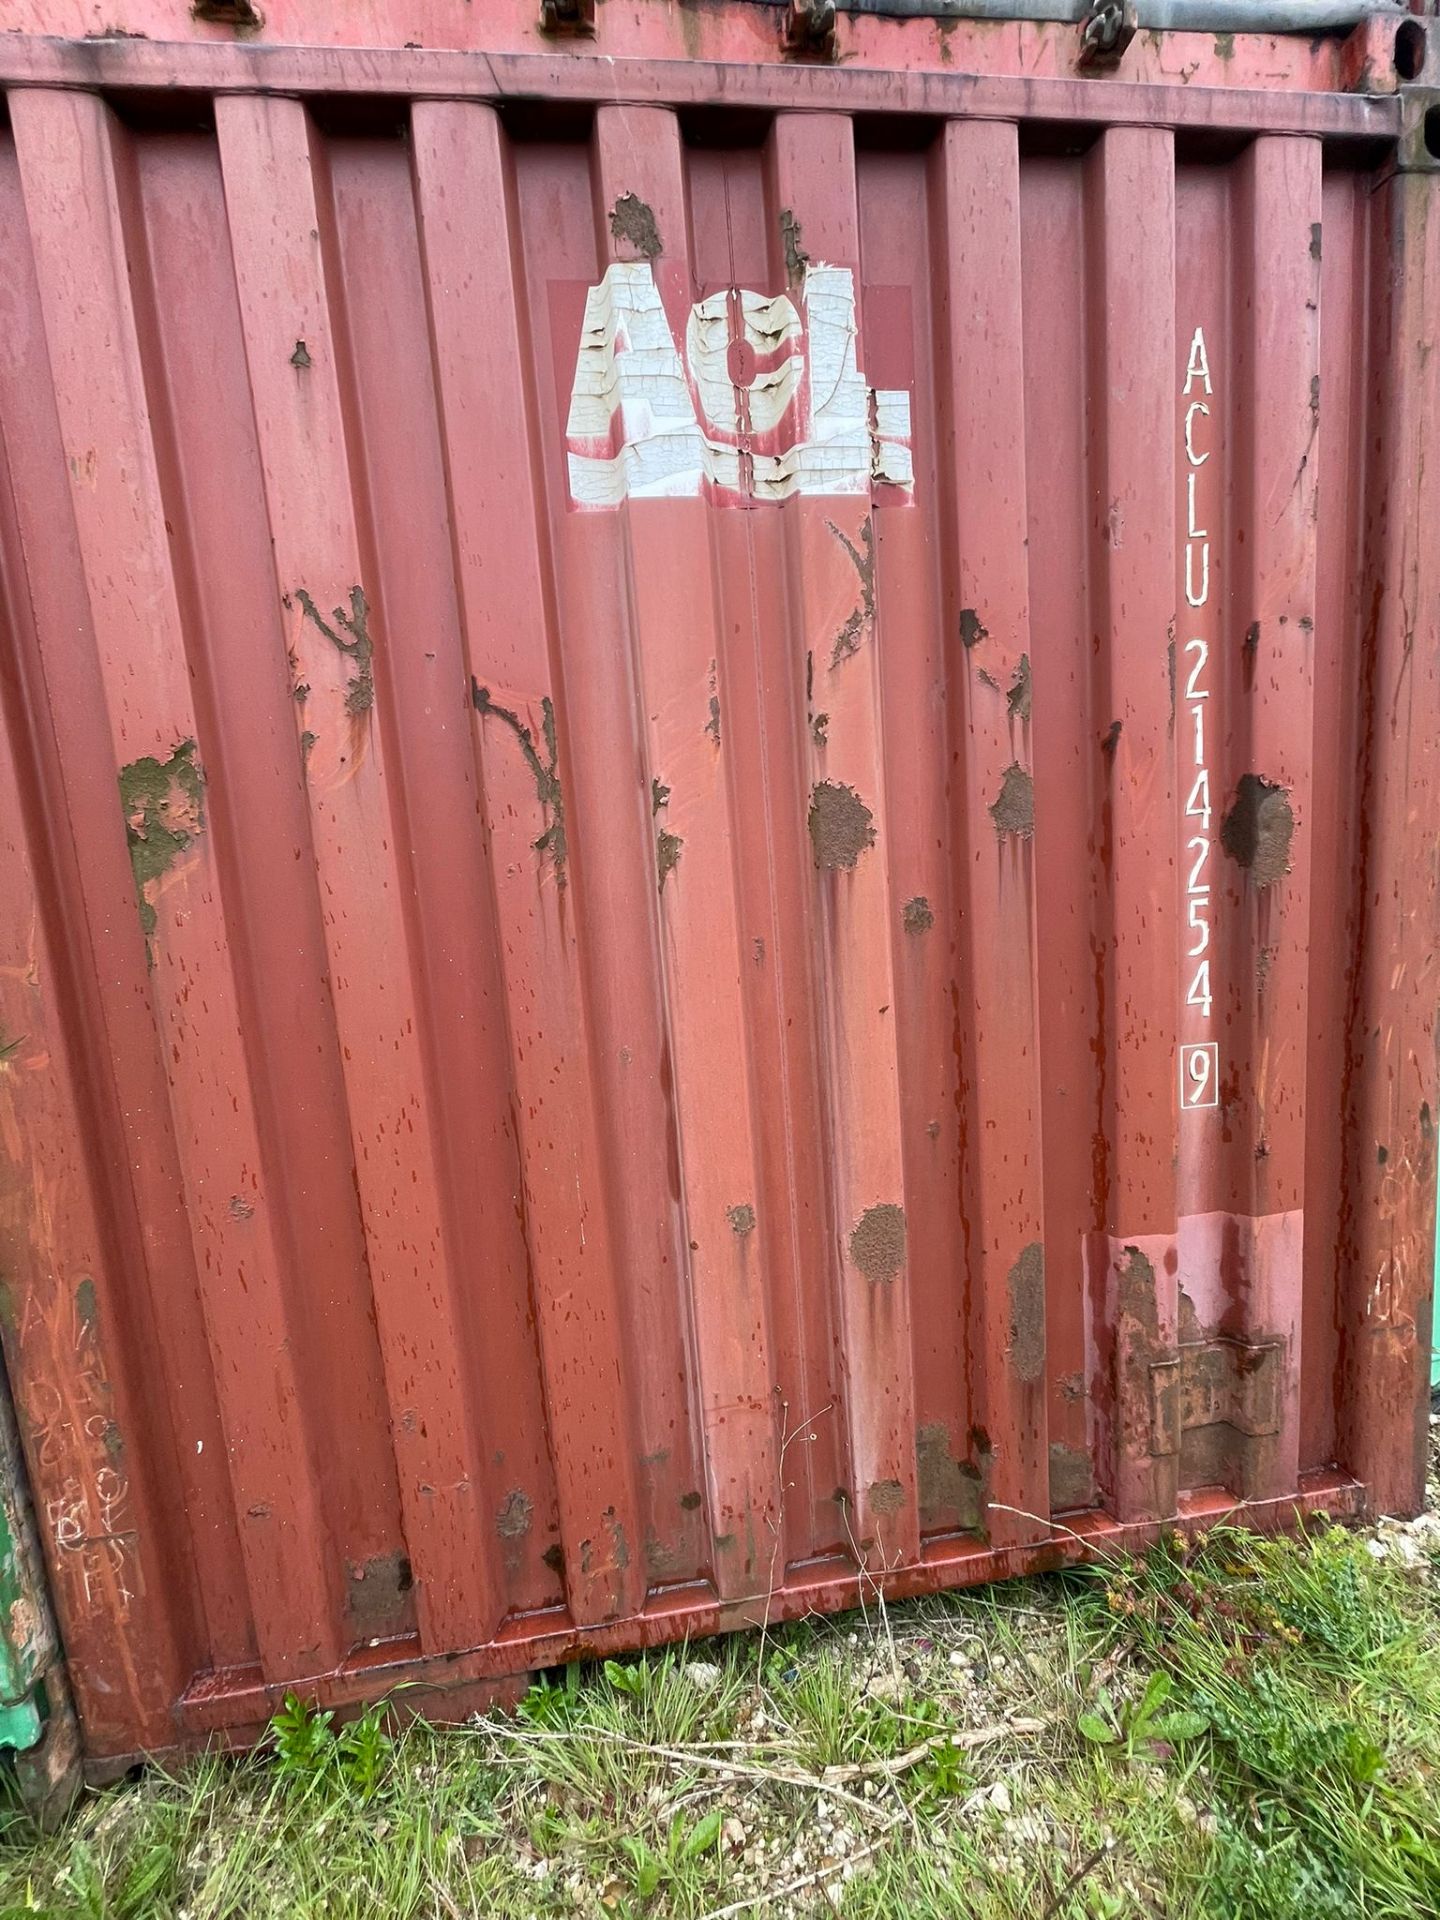 Shipping Container - ref ACLU2142549 - NO RESERVE (40’ GP - Standard) - Image 4 of 4